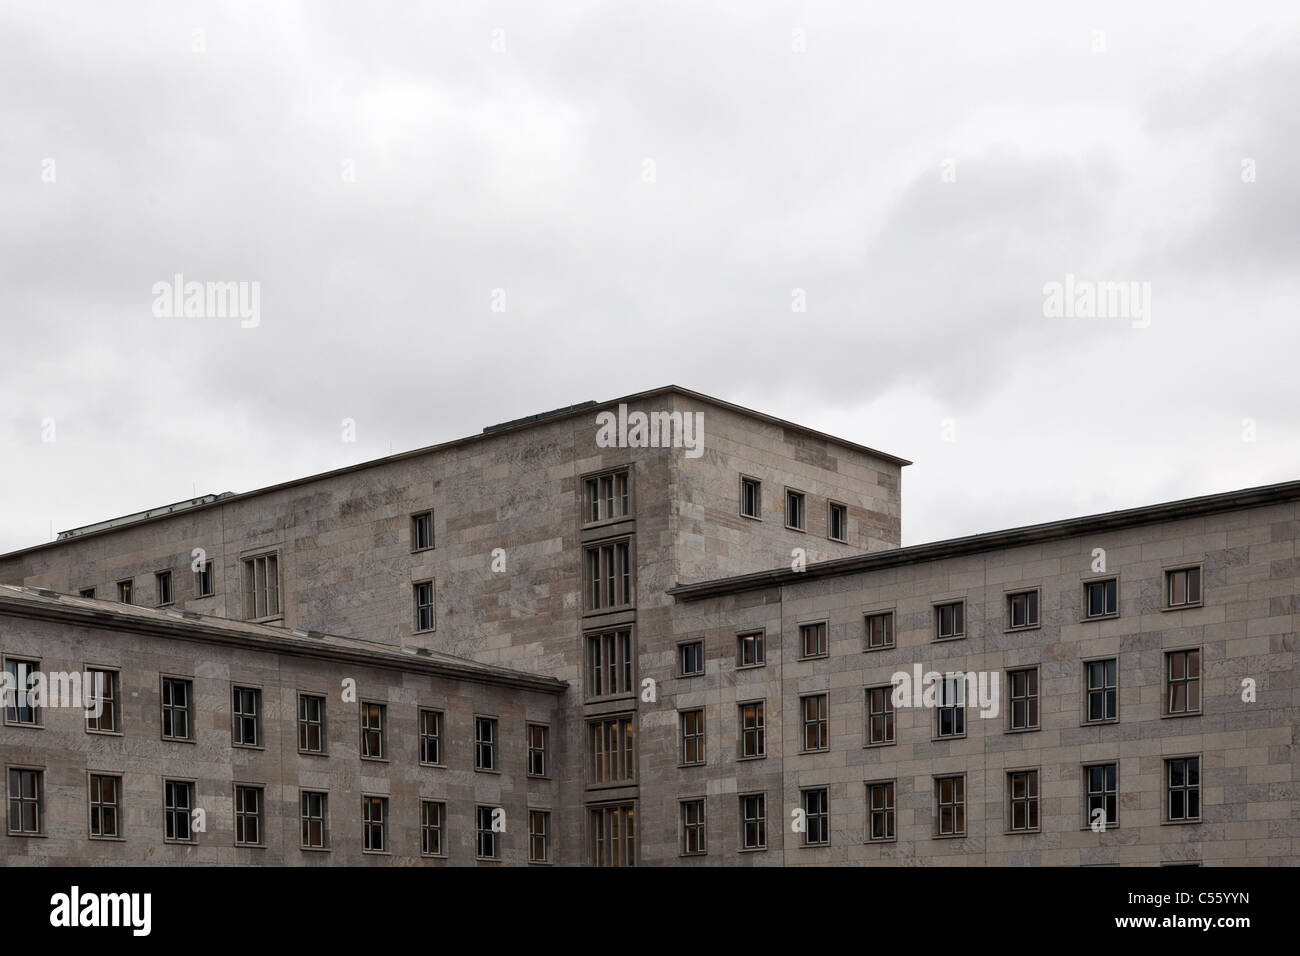 The German Federal Ministry of Finance. Berlin, Germany. Stock Photo